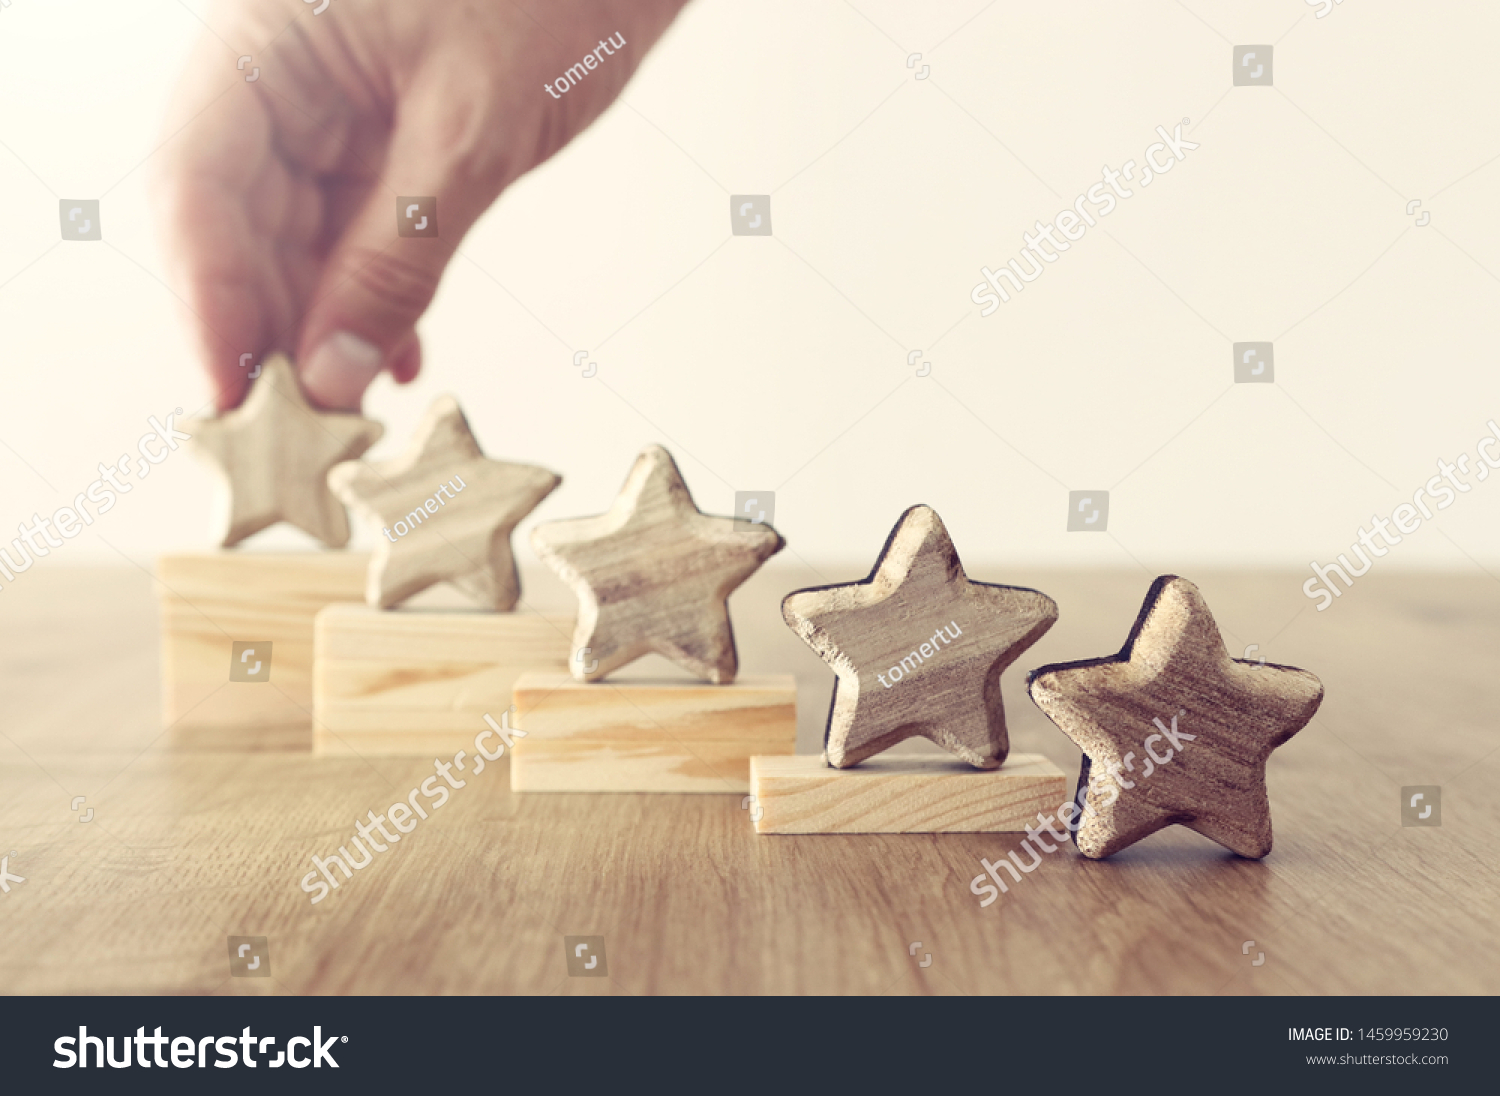 business concept image of setting a five star goal. increase rating or ranking, evaluation and classification idea #1459959230